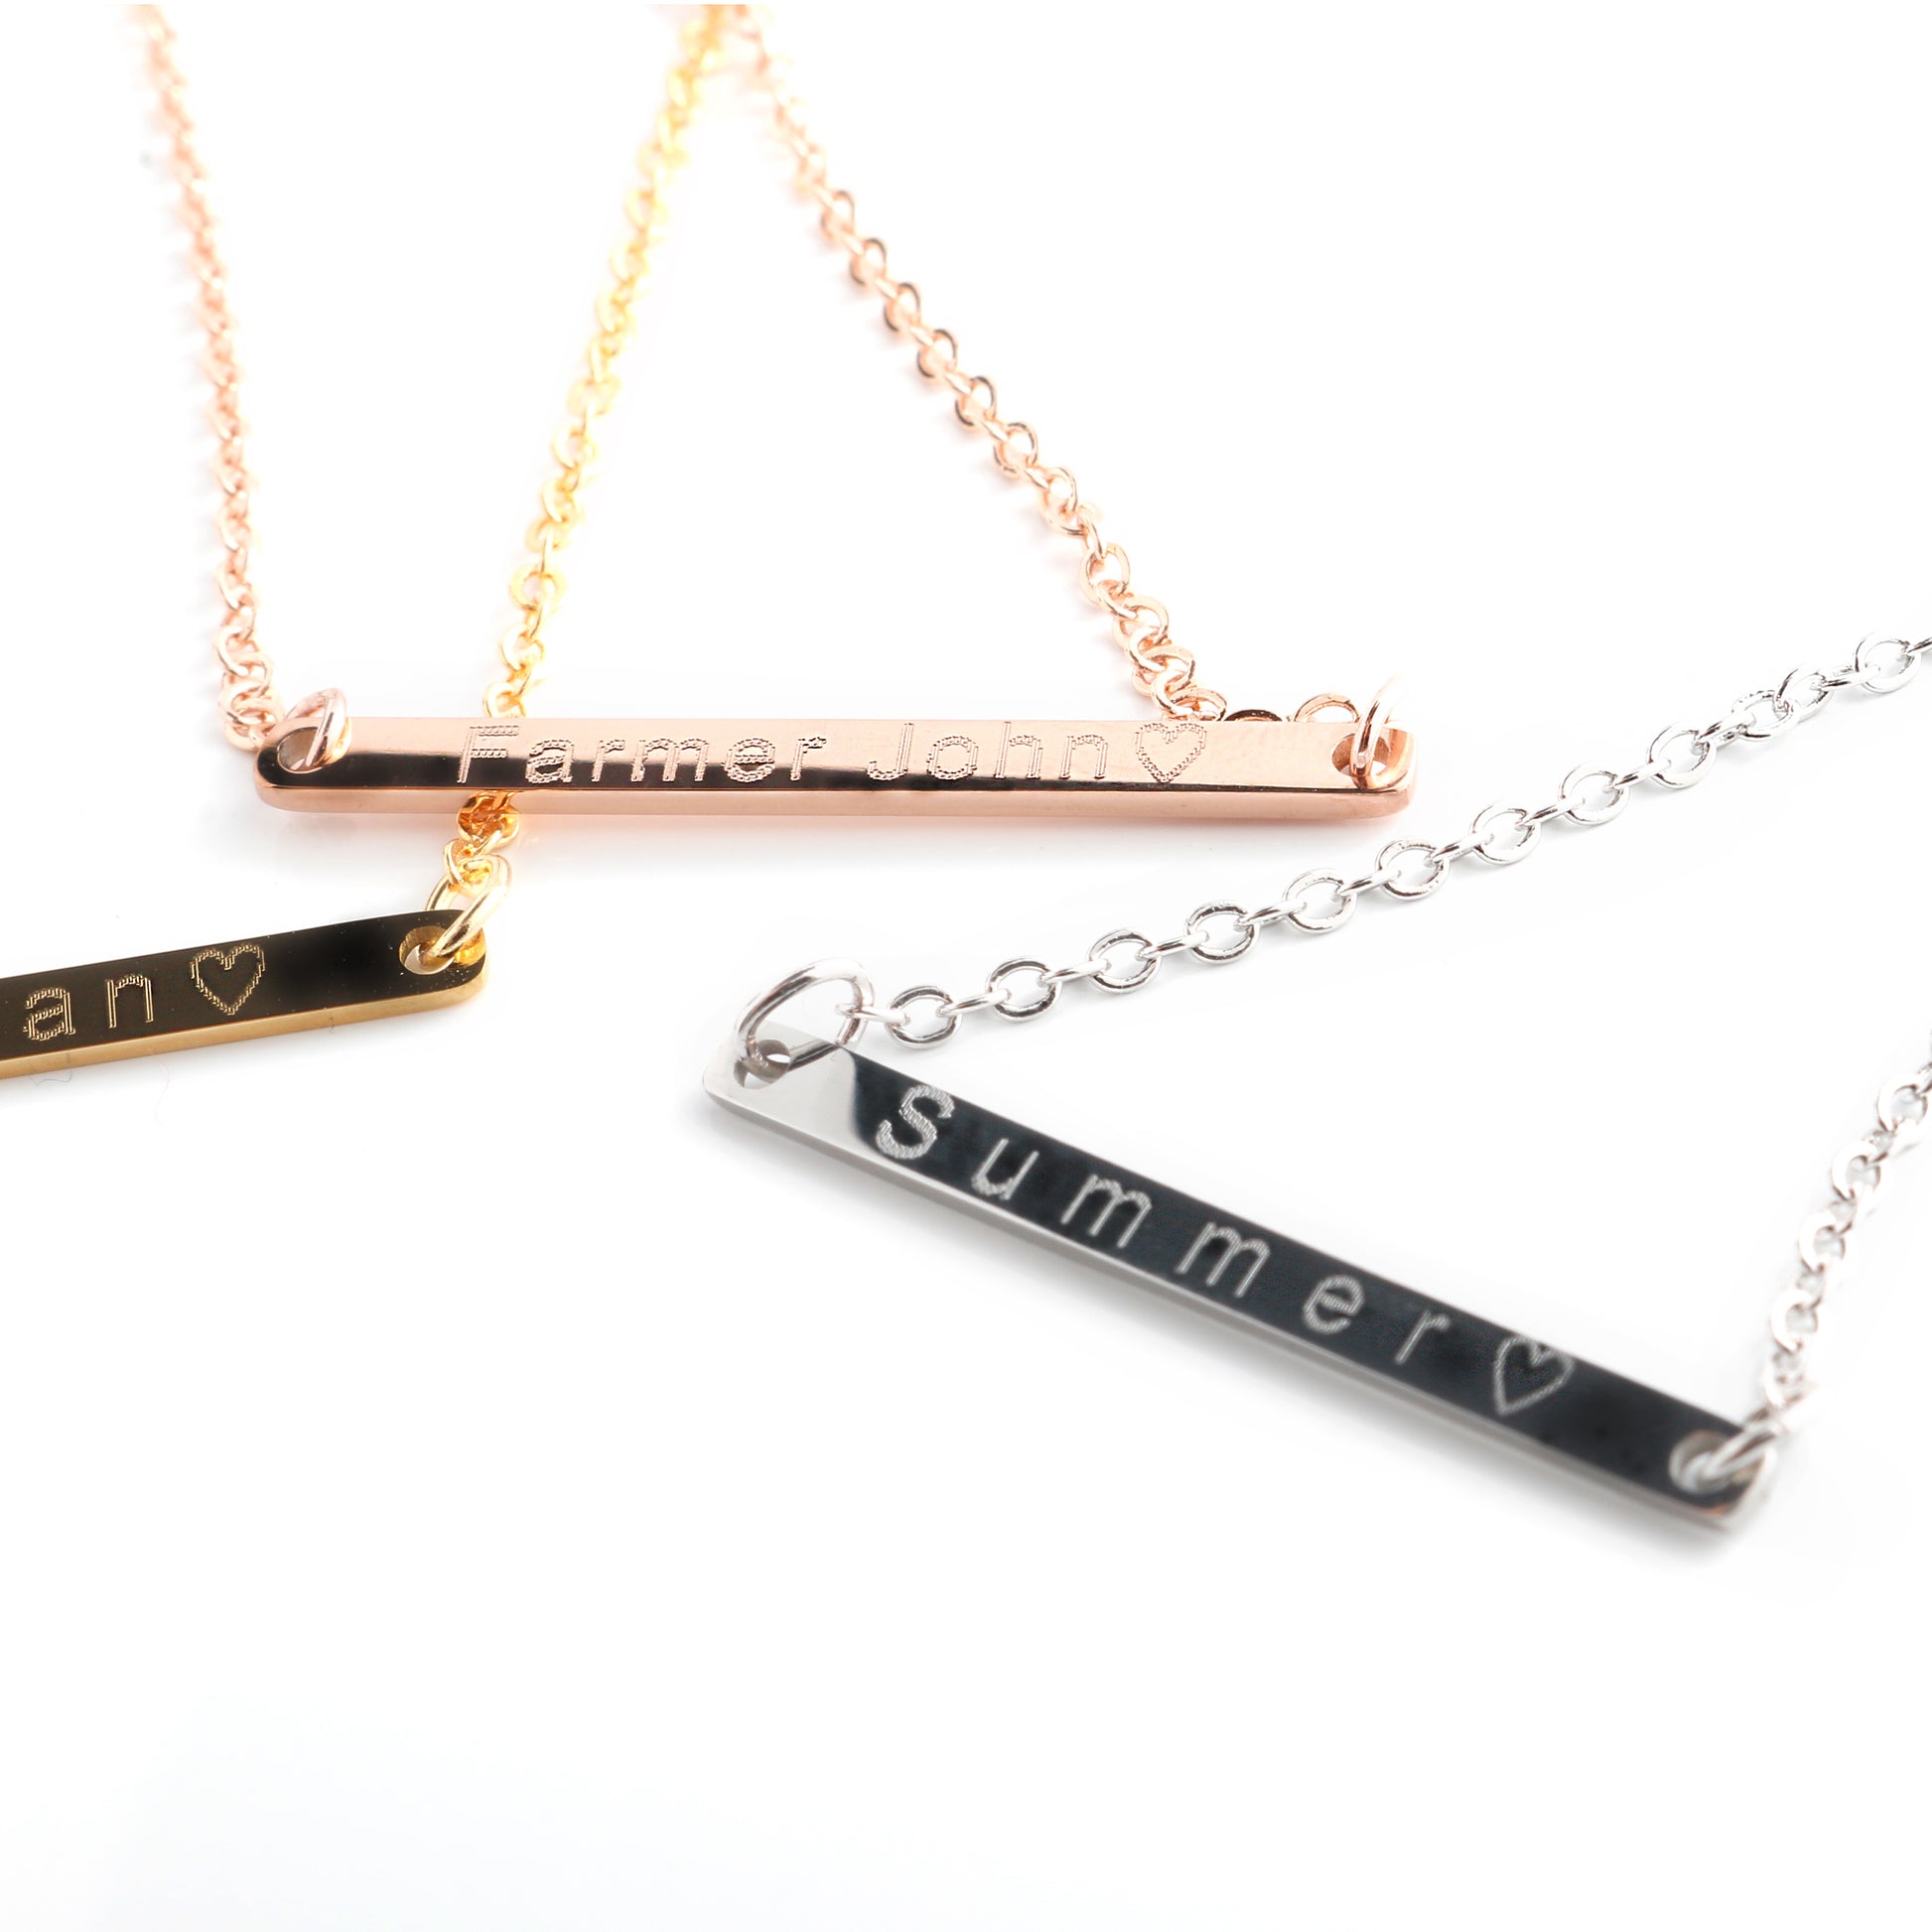 Buy Custom Name Necklace - A Perfect Gift for Women at Petite Boutique